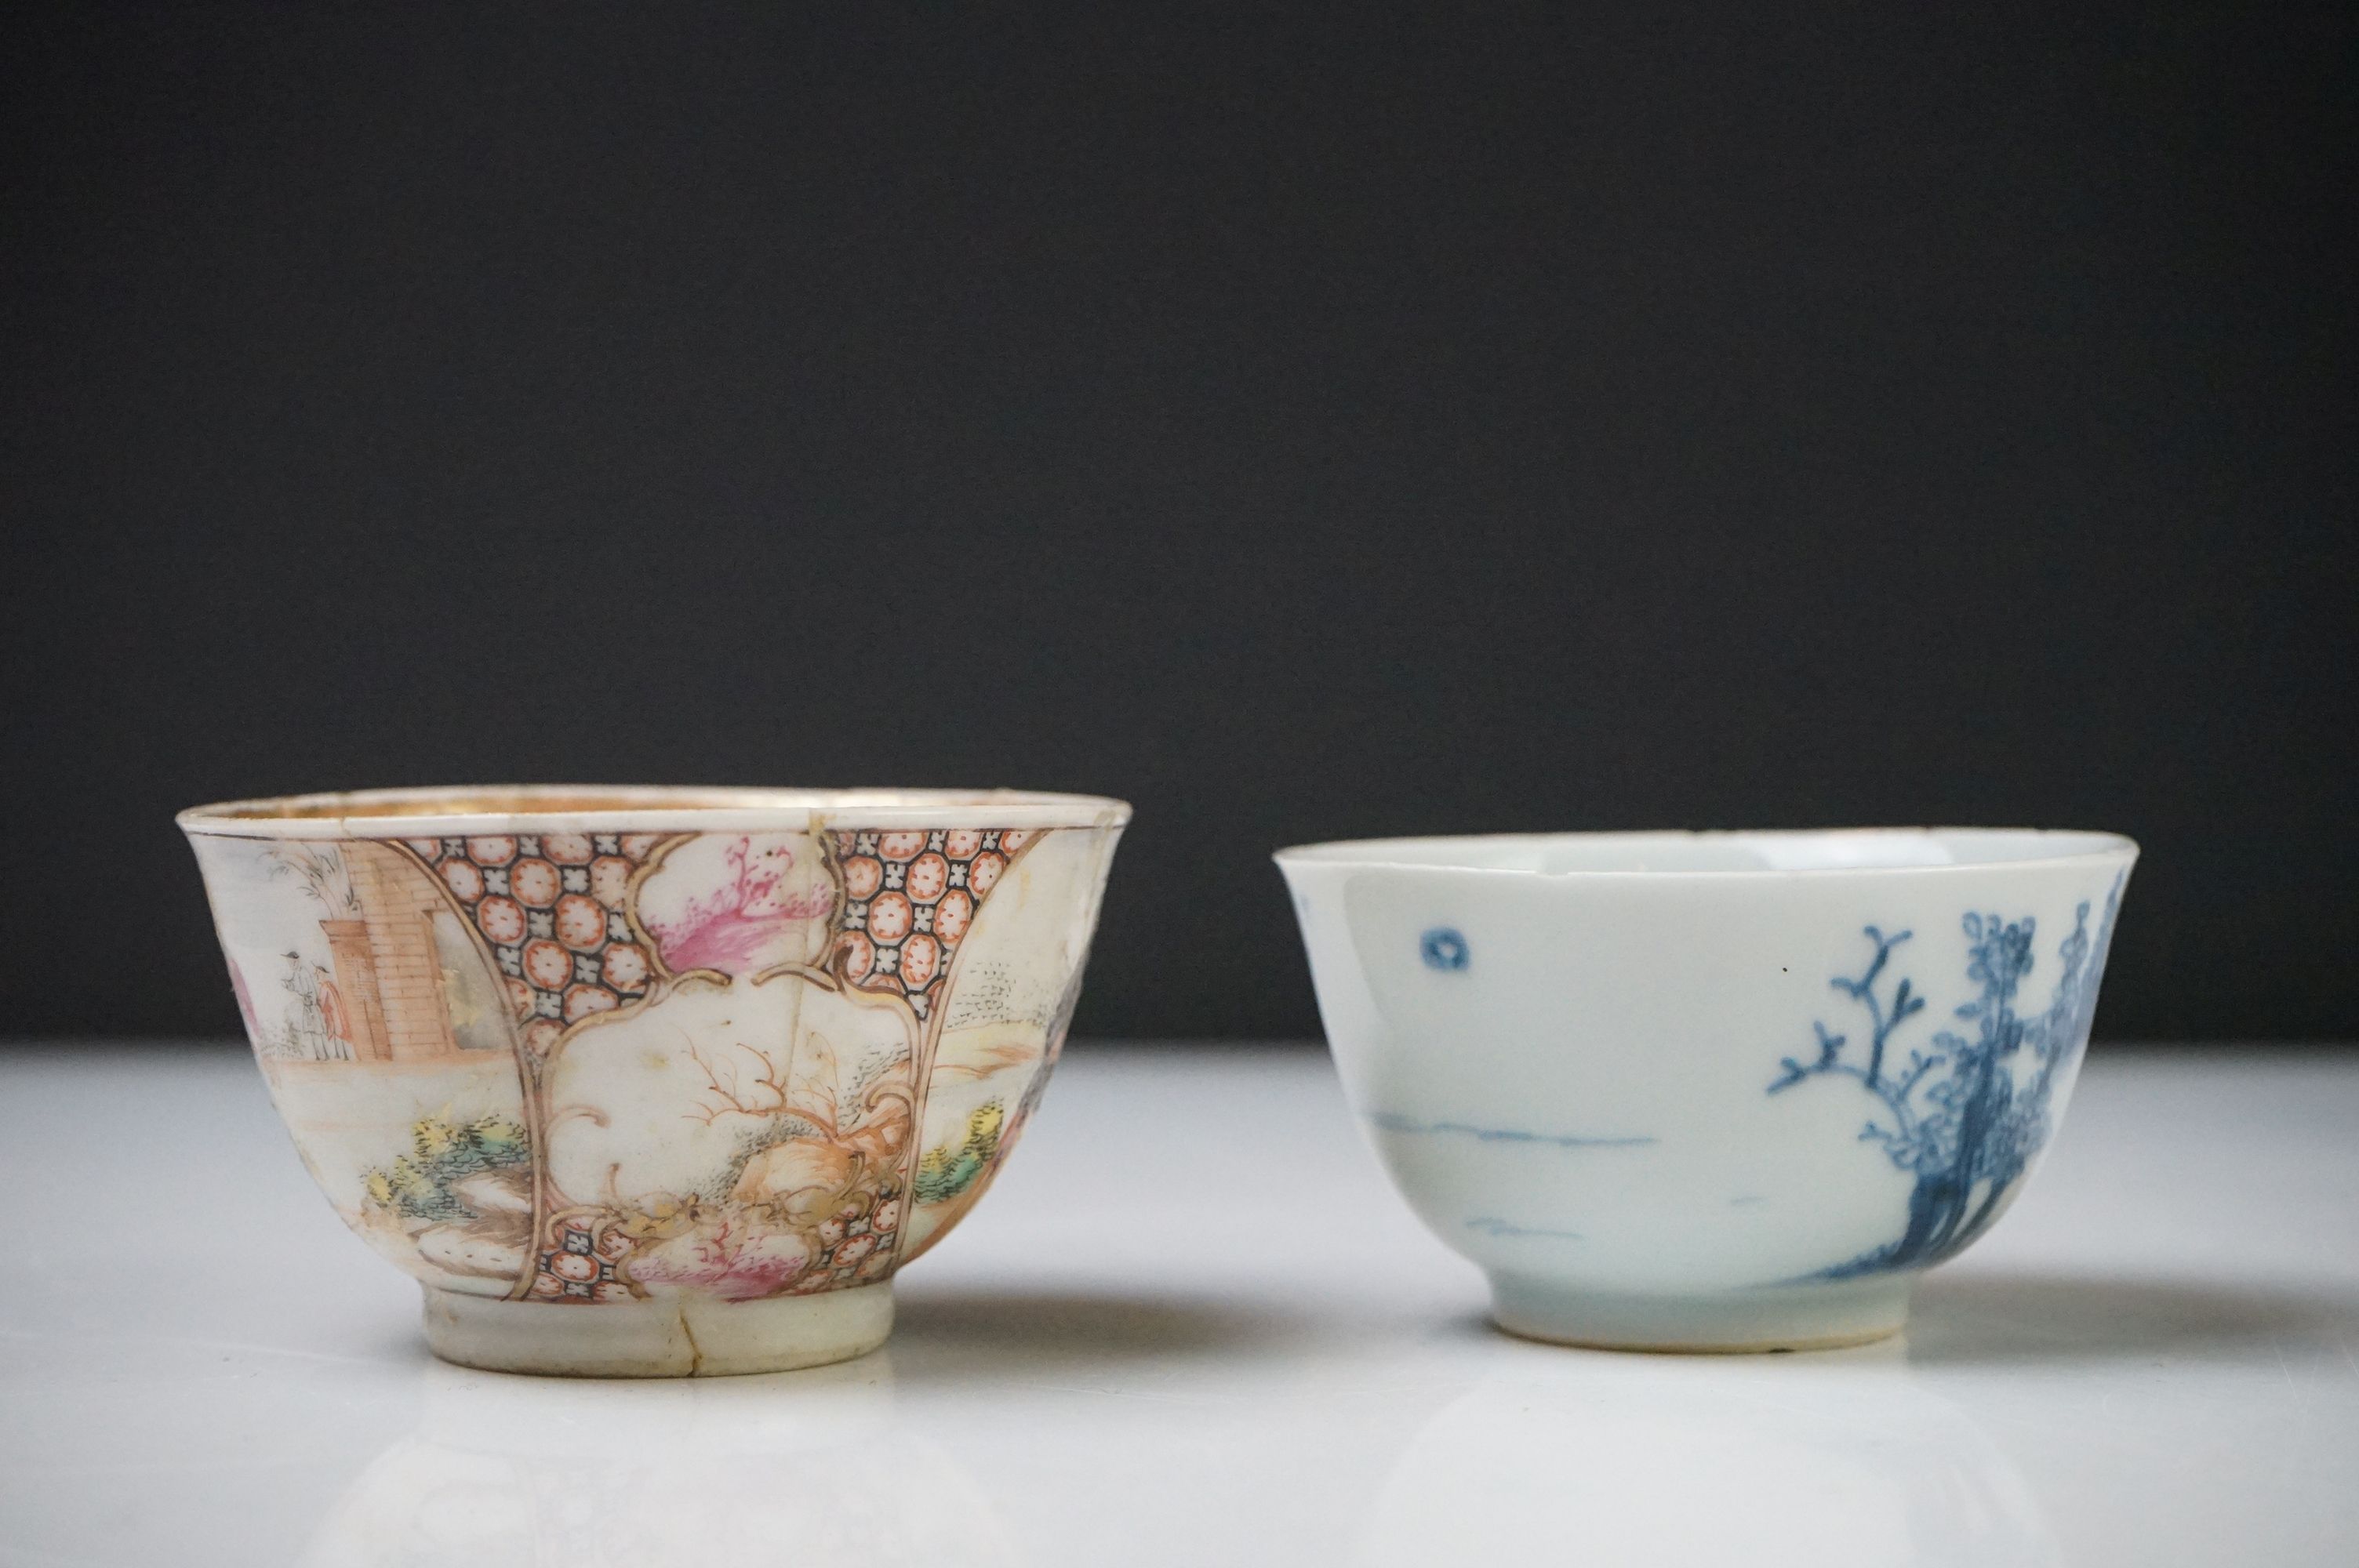 Collection of Chinese Tea Bowls, Cups and Saucers, 18th century onwards, mainly famille rose and - Image 10 of 28